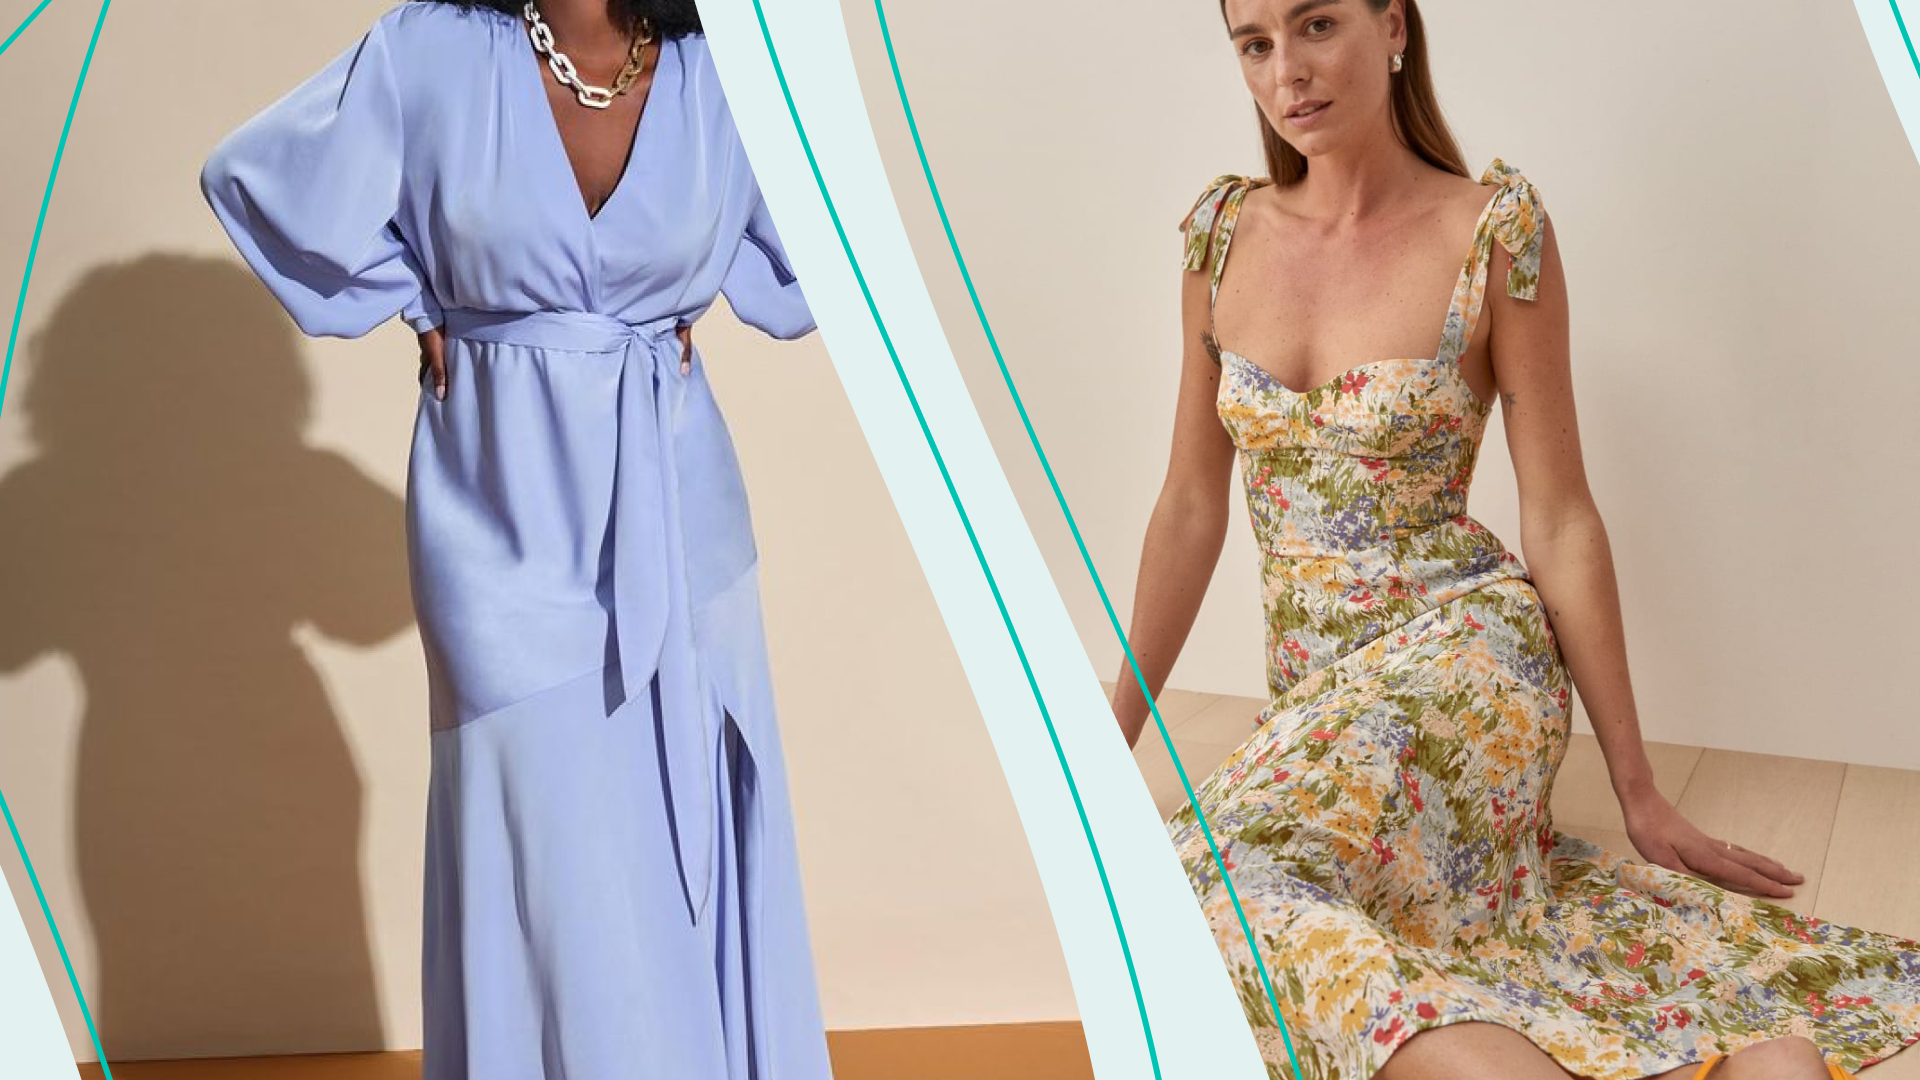 Spring Wedding Guest Dresses for Every Budget